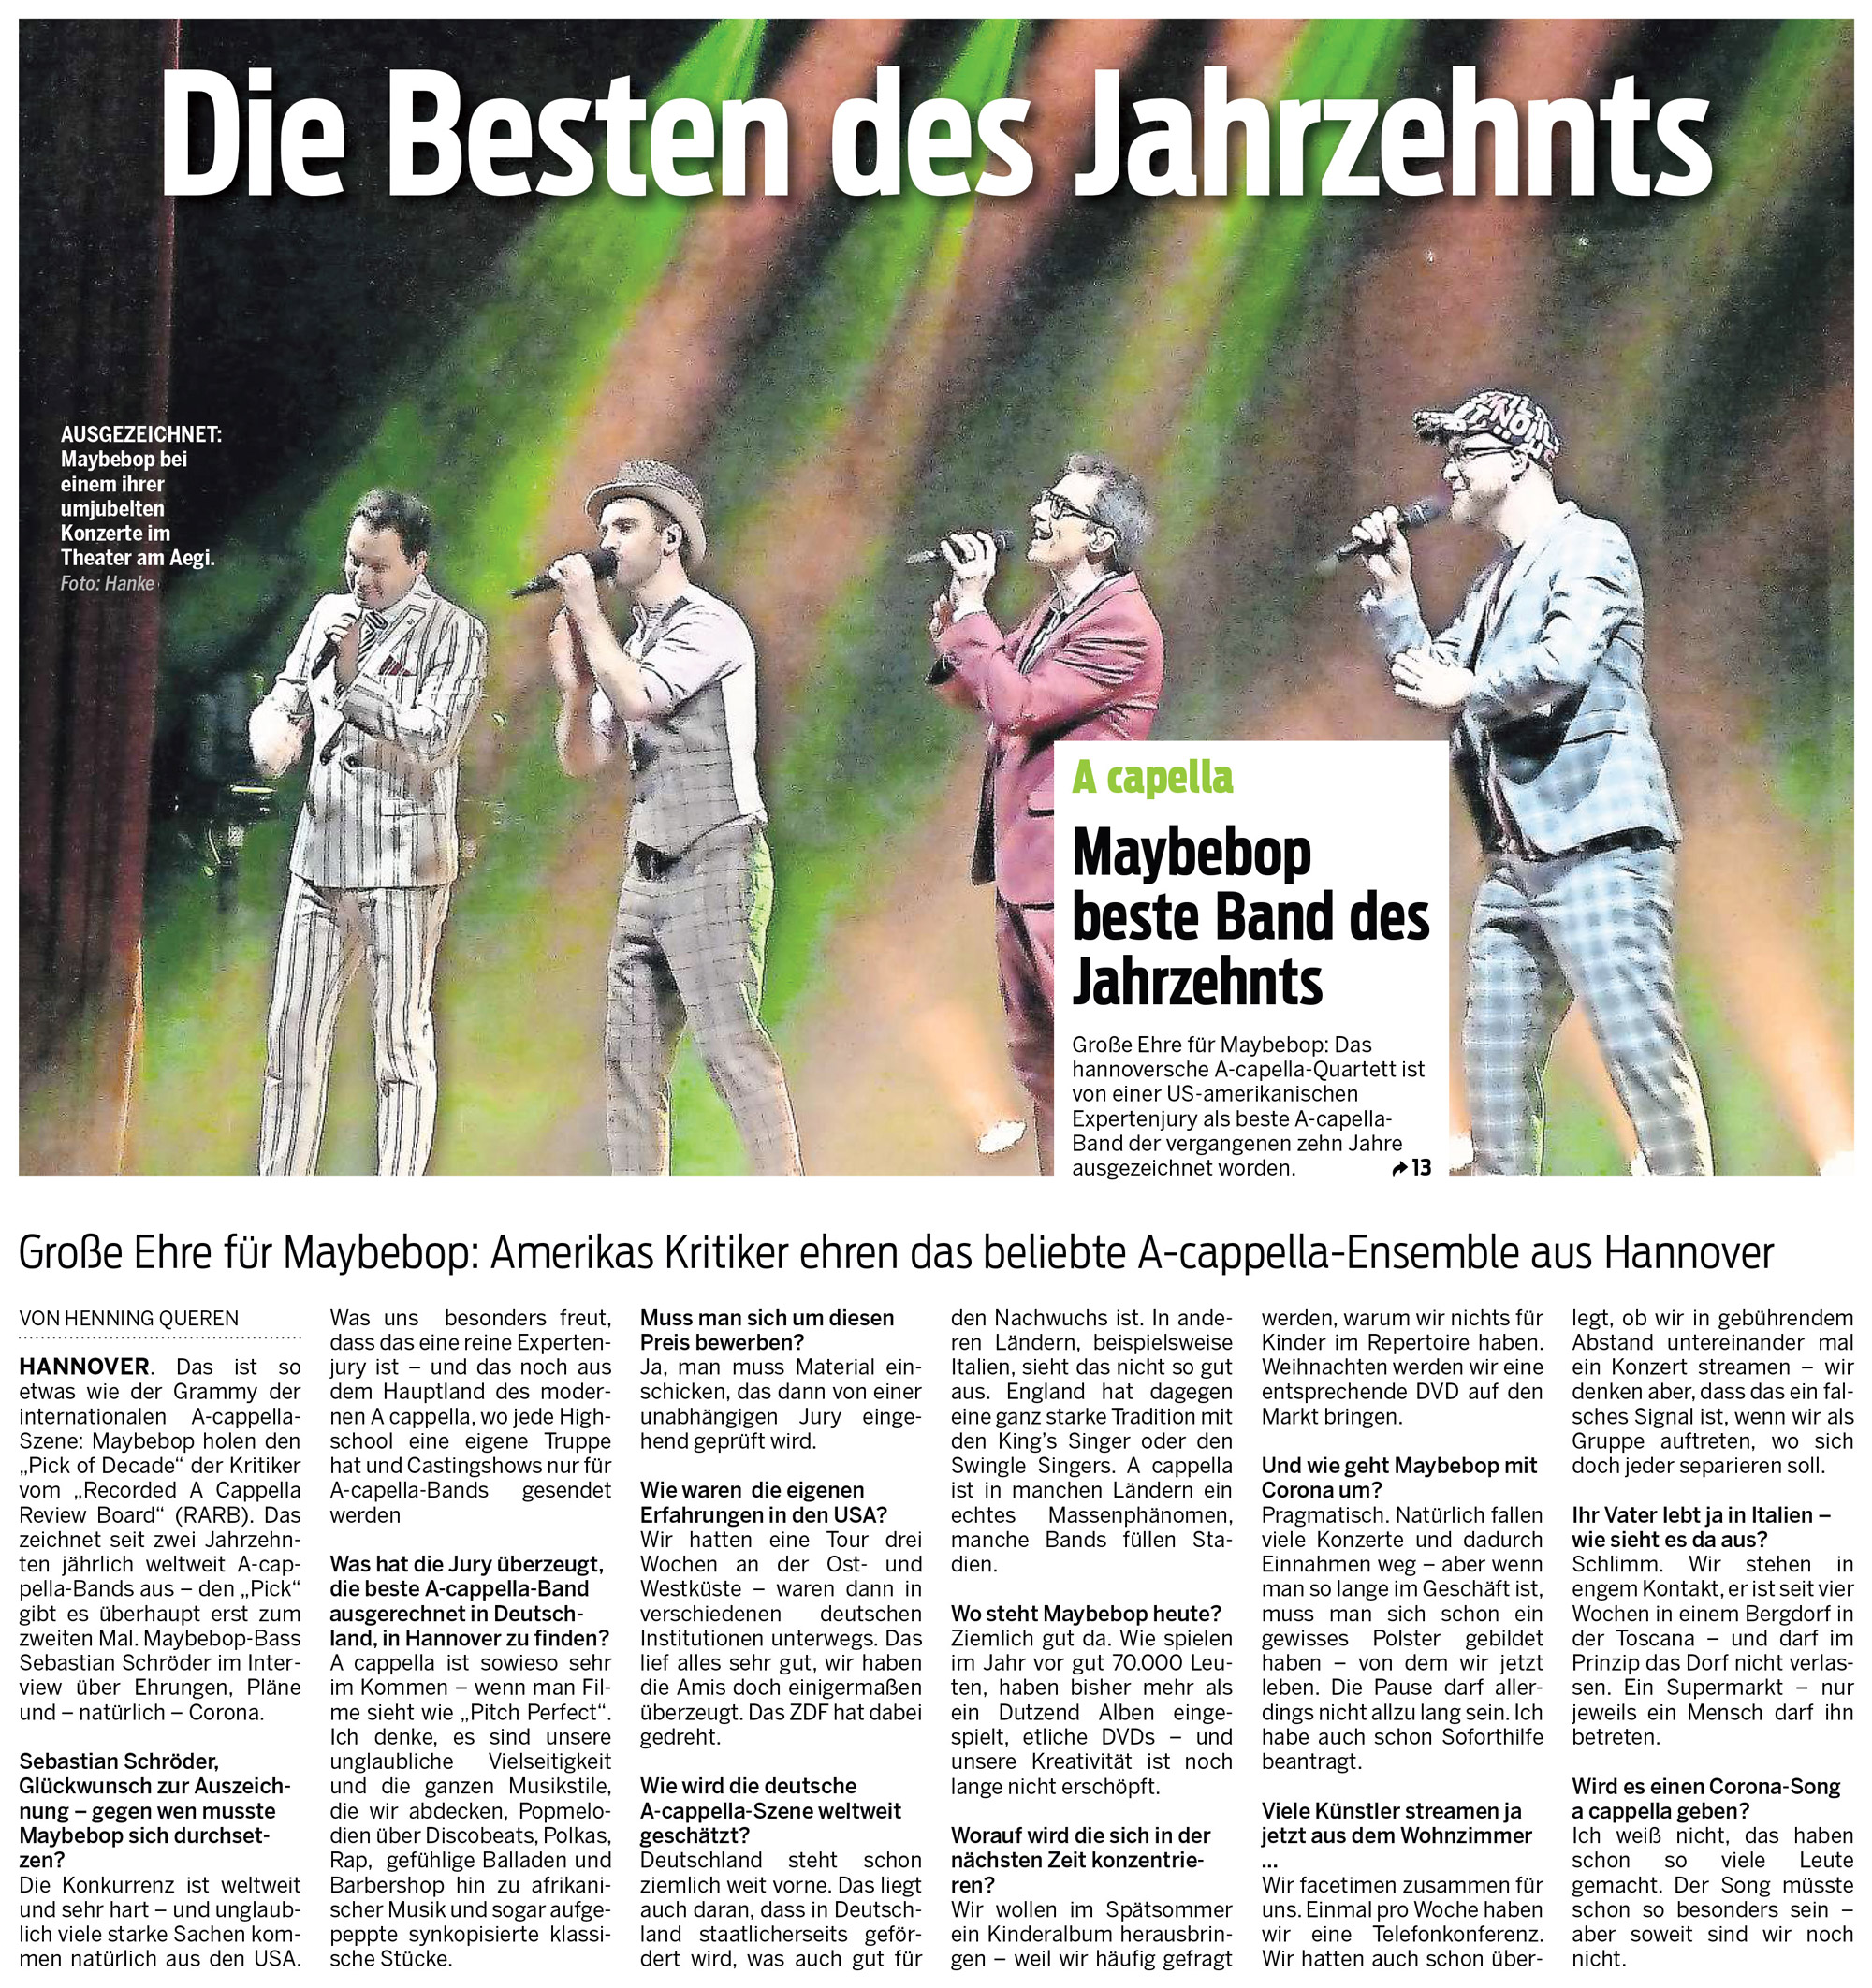 Article “Neue Presse” Hanover from 08.04.2020